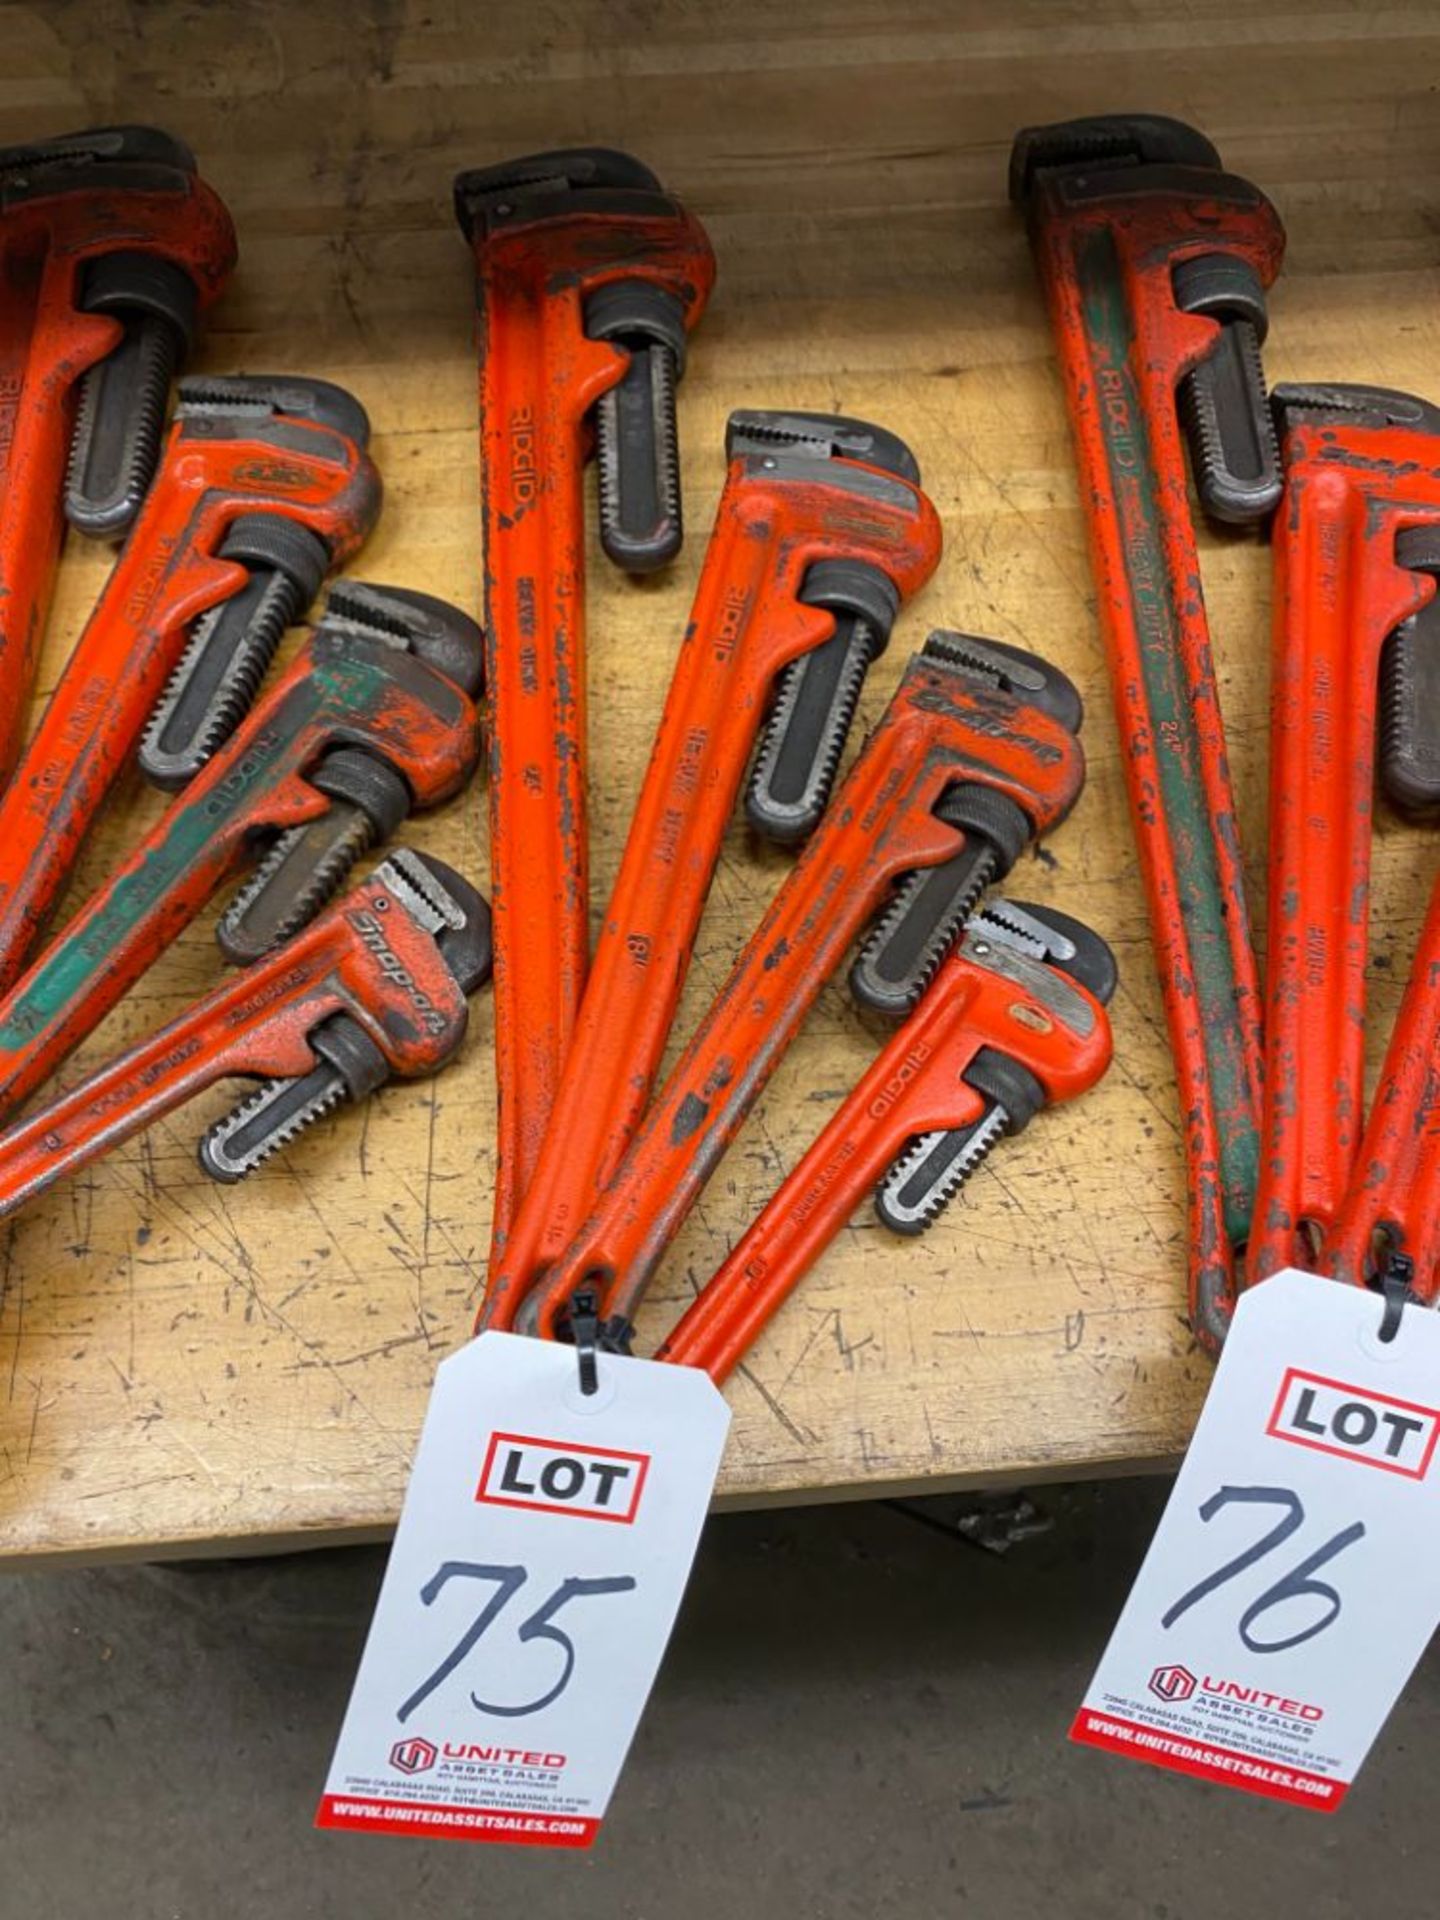 LOT - RIDGID &/OR SNAP-ON PIPE WRENCH SET: 24", 18", 14", 10"